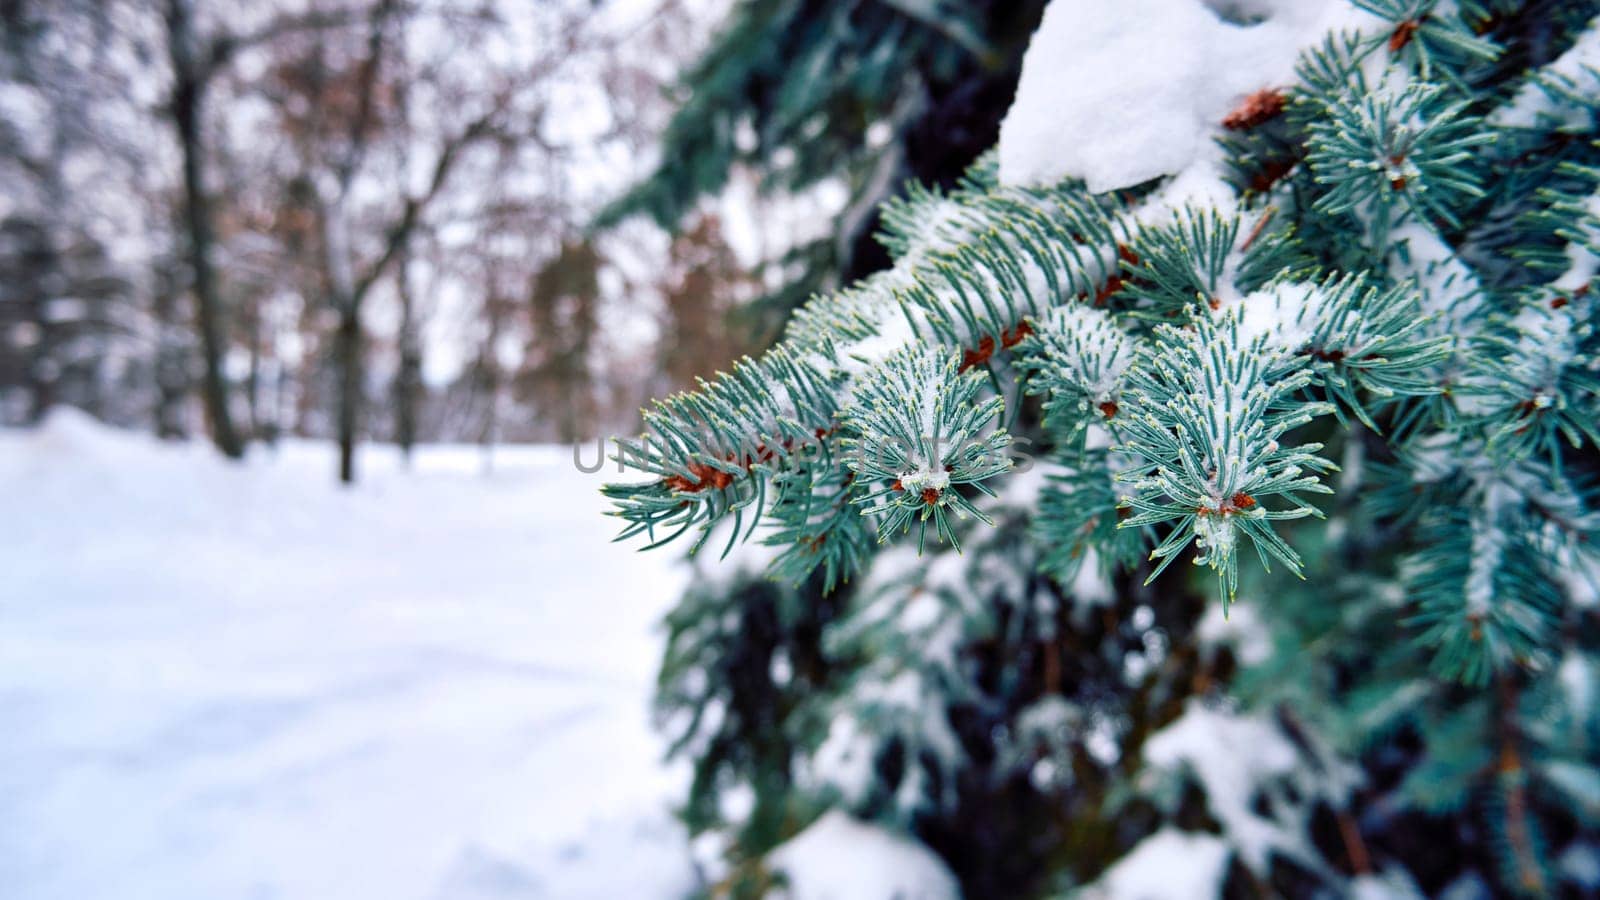 Fir branches covered with snow in the winter forest by DAndreev